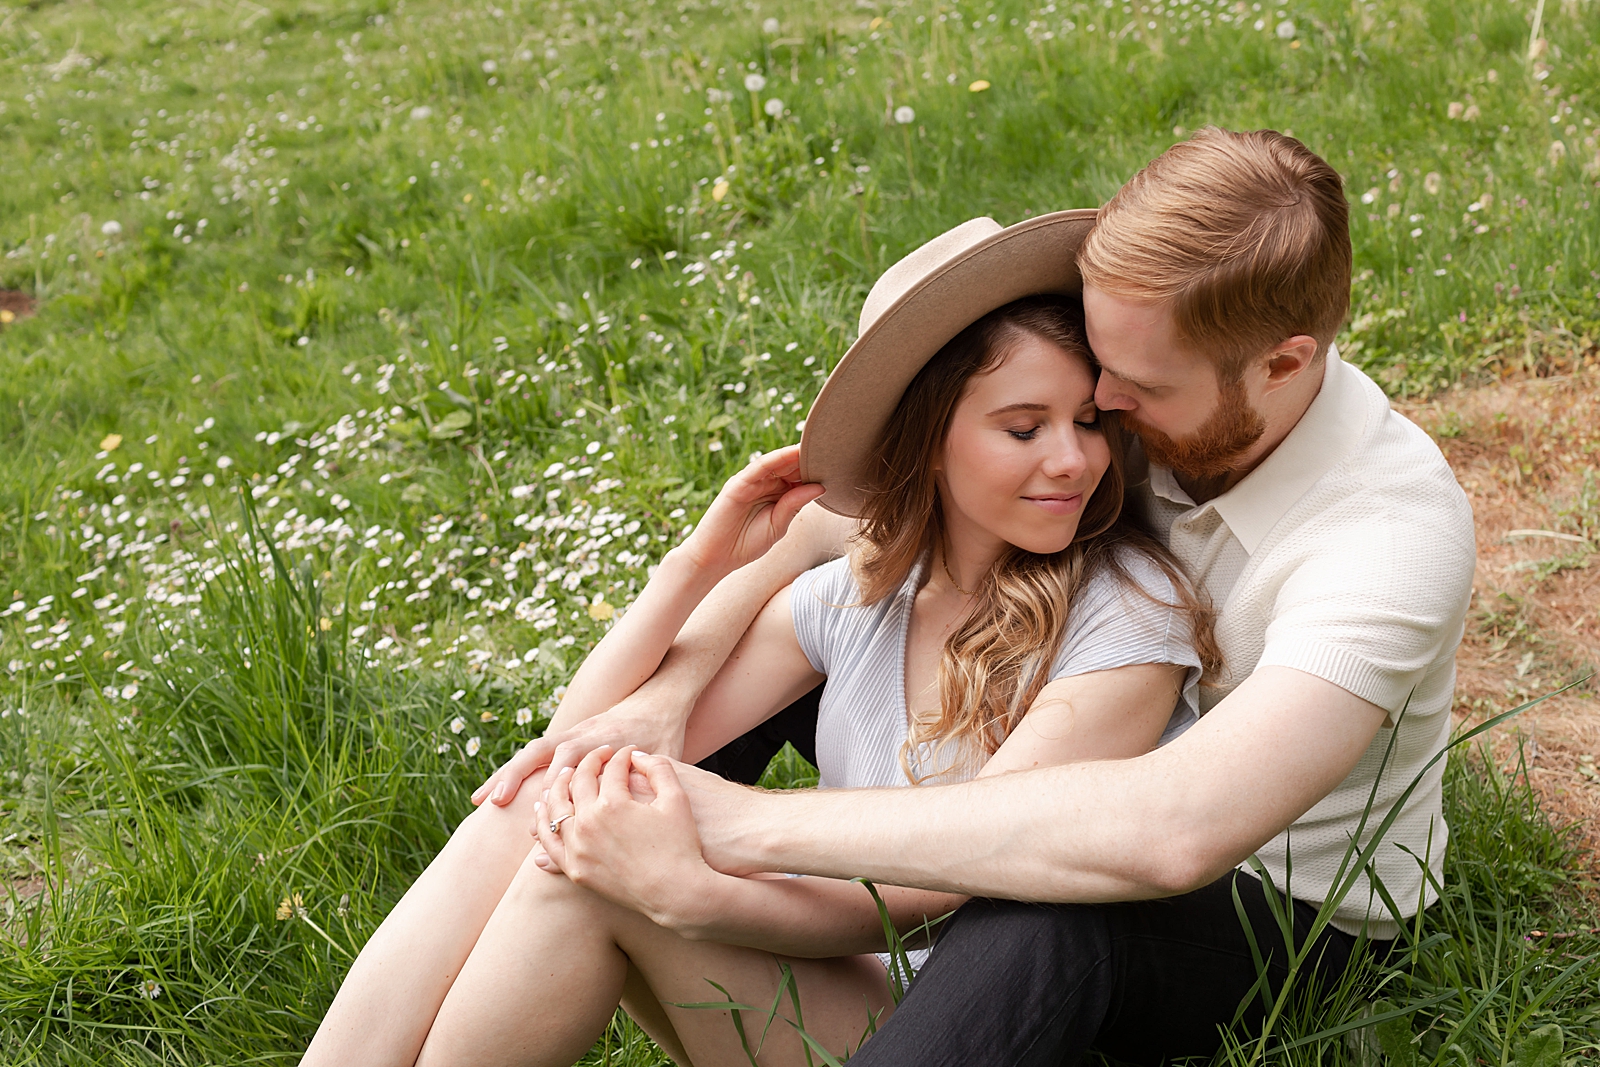 Man holding woman and sitting on grassy field